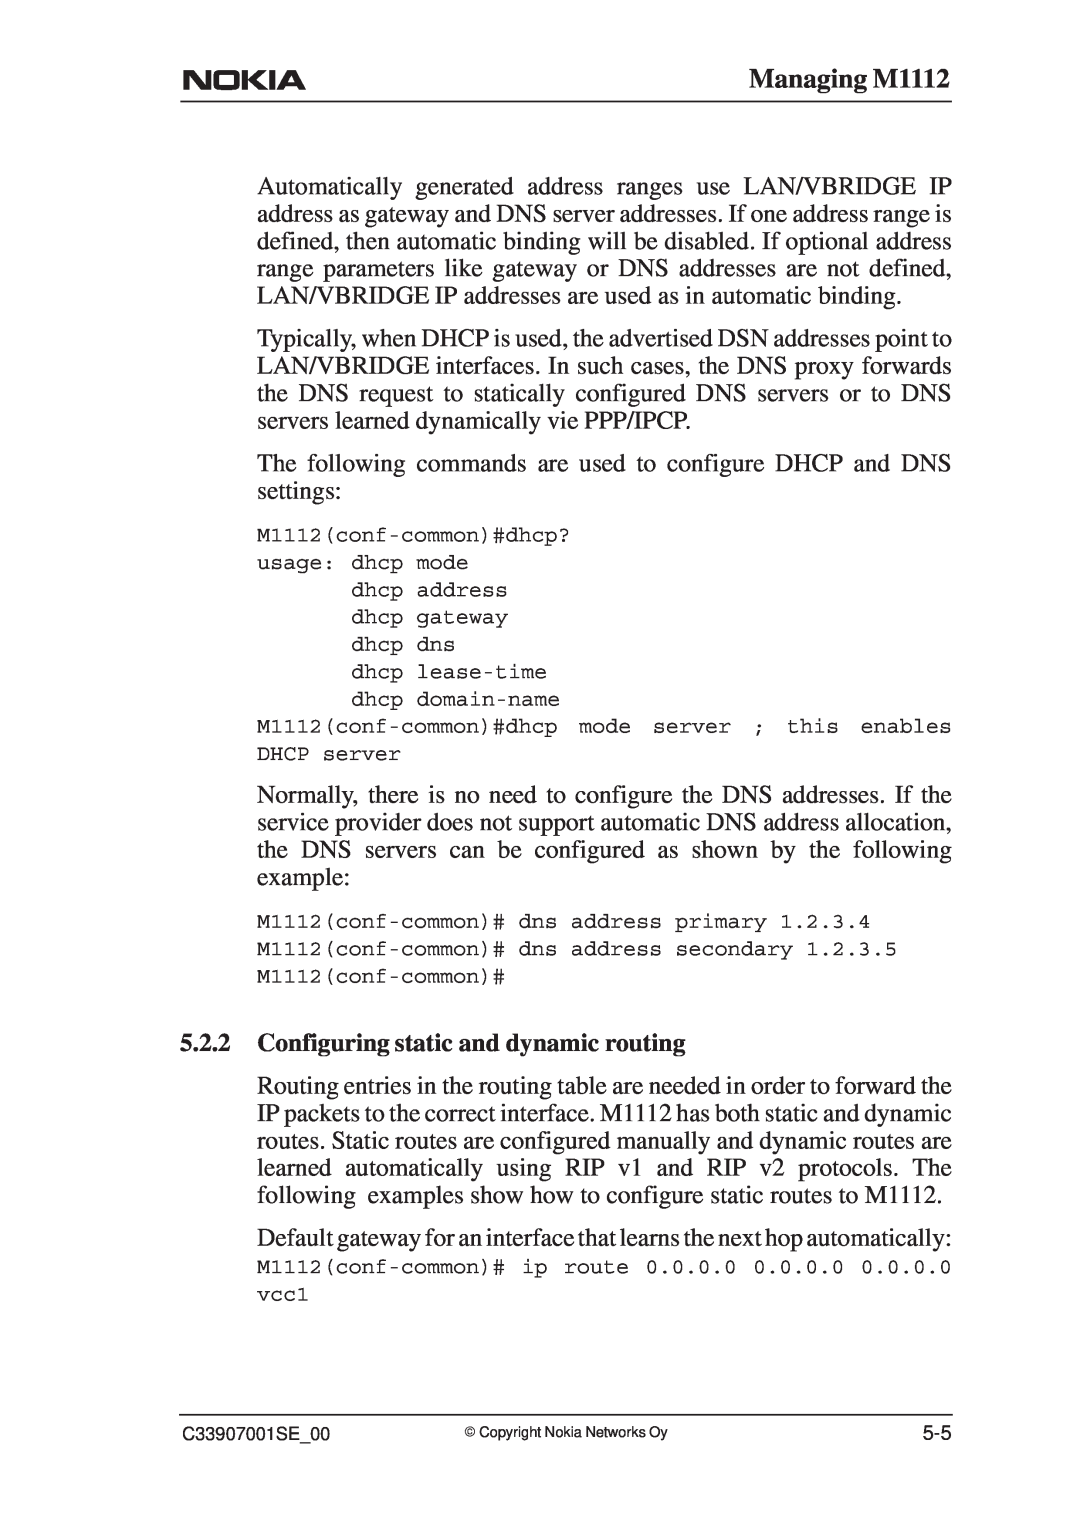 Nokia manual Managing M1112, Configuring static and dynamic routing 